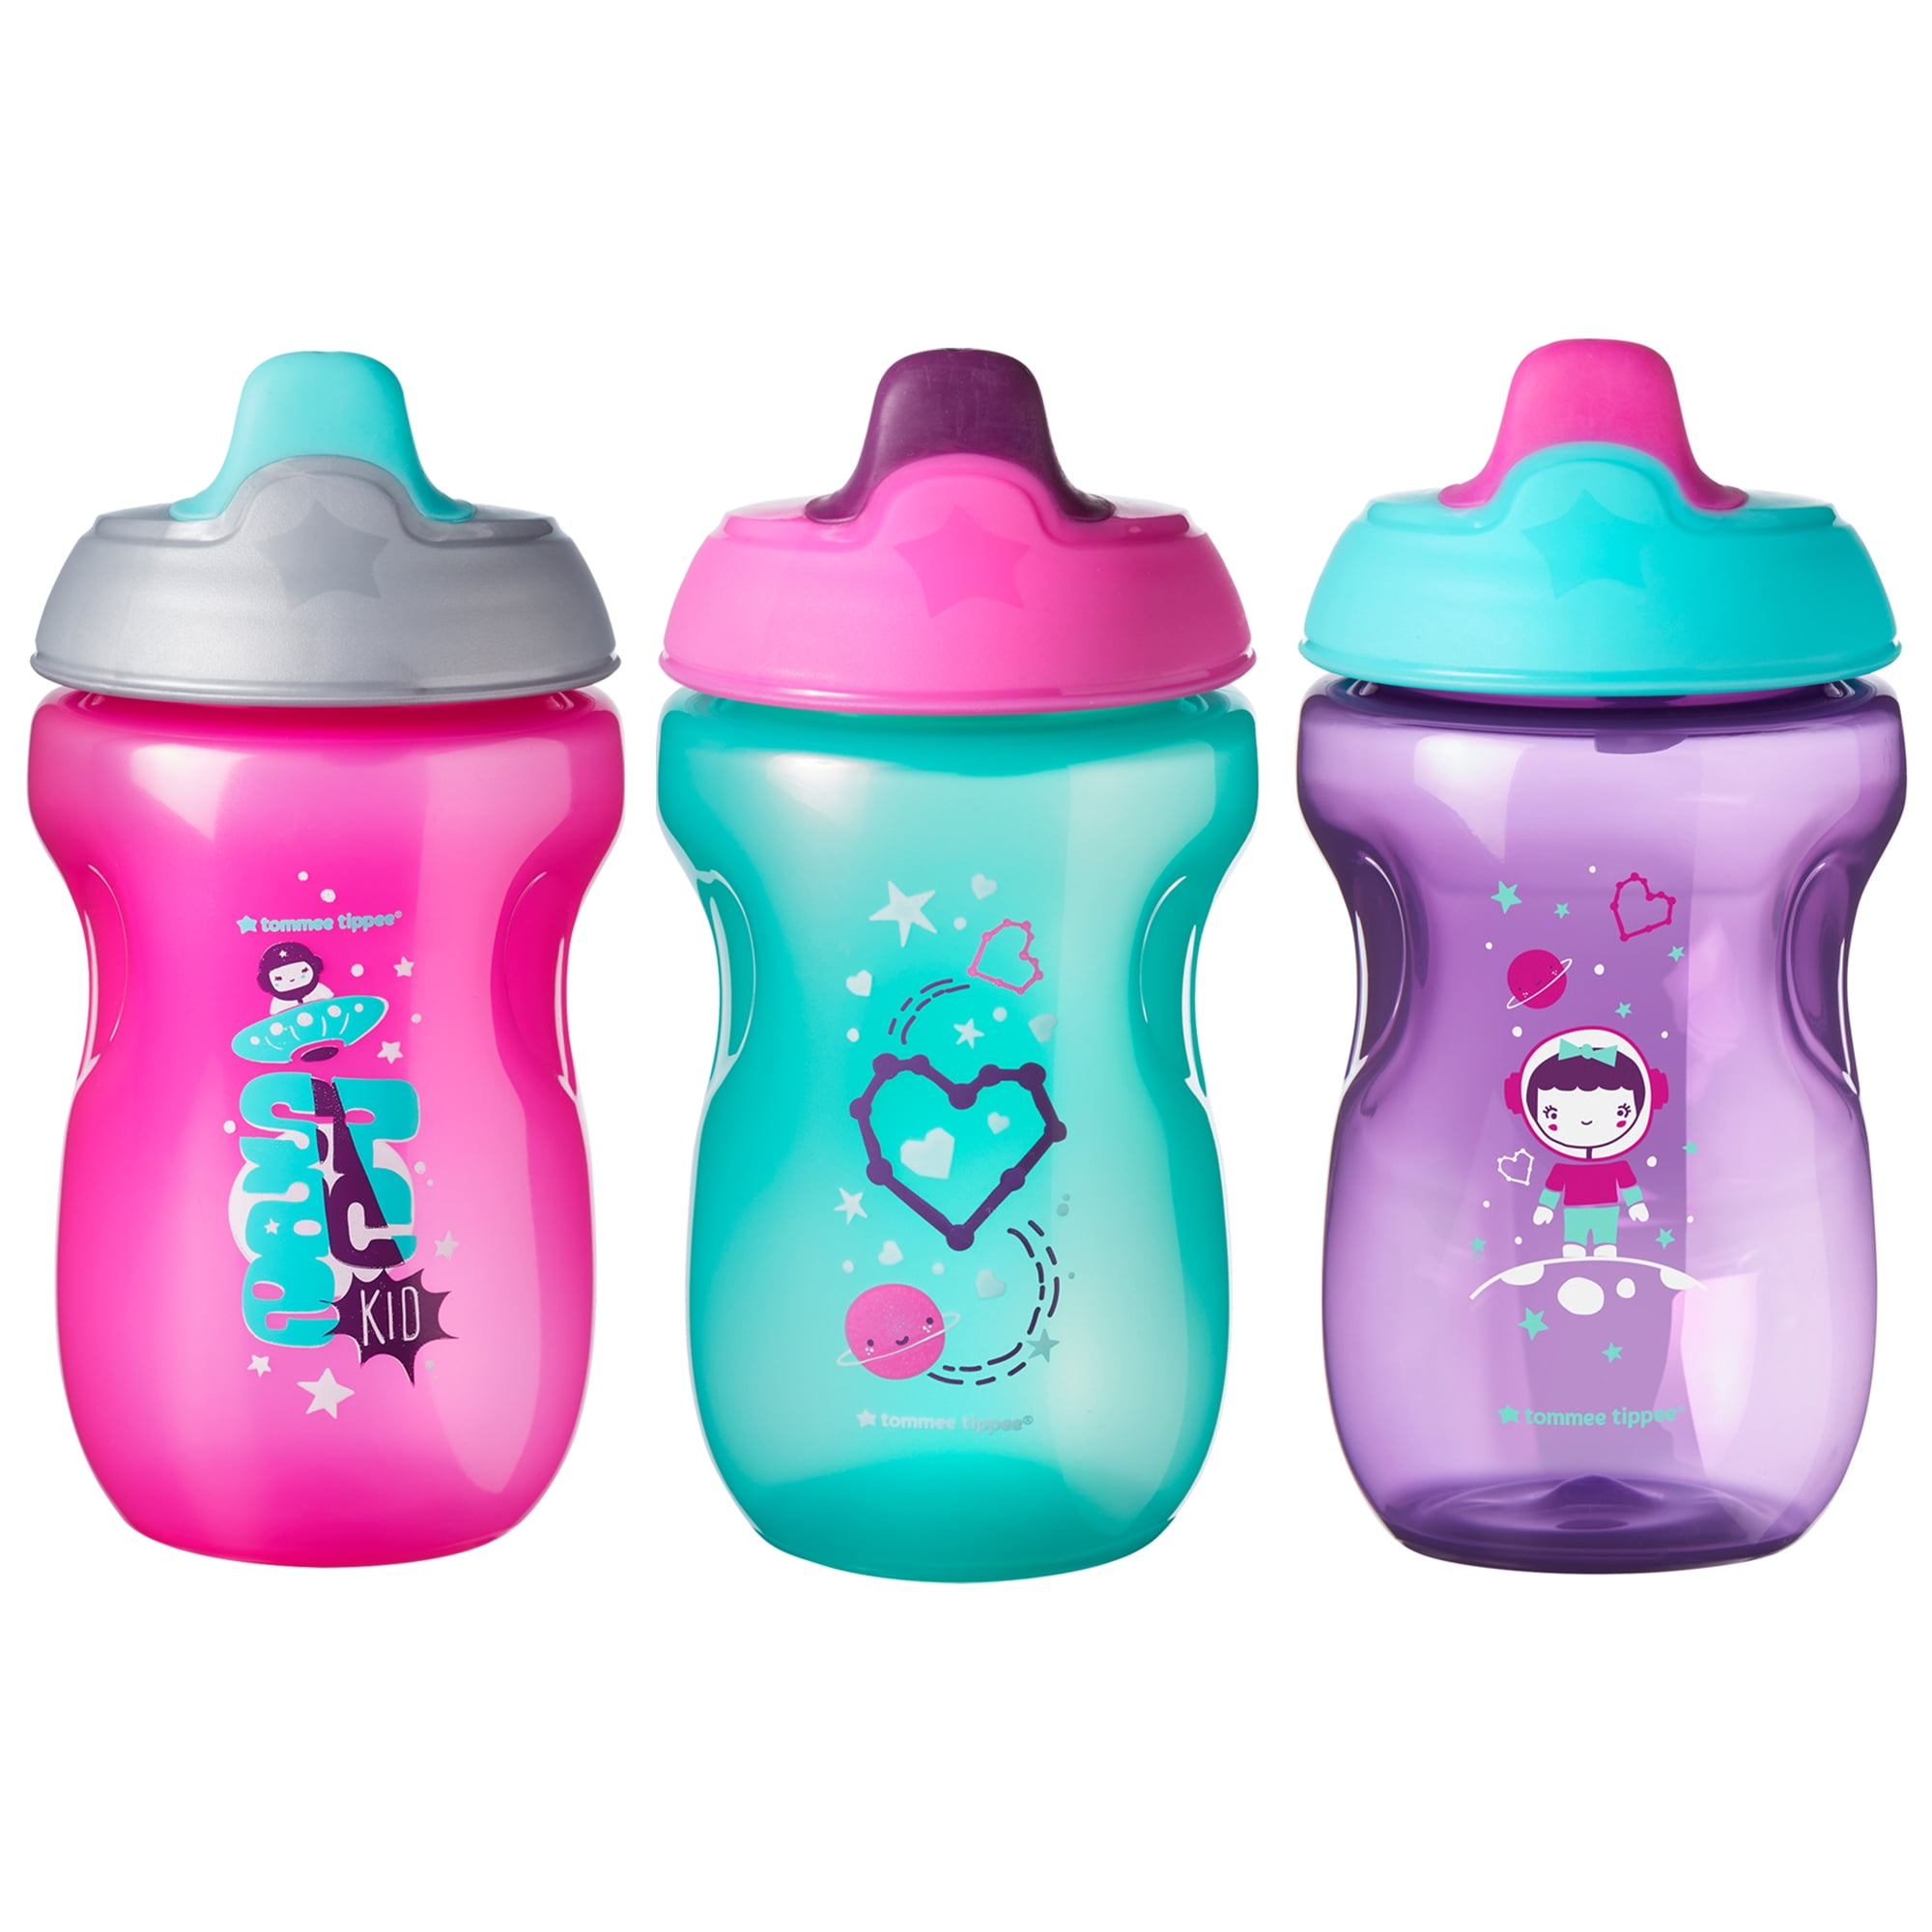 Tommee Tippee Sippee Cup Toddler 12 Mo + USA Space Rocket Non